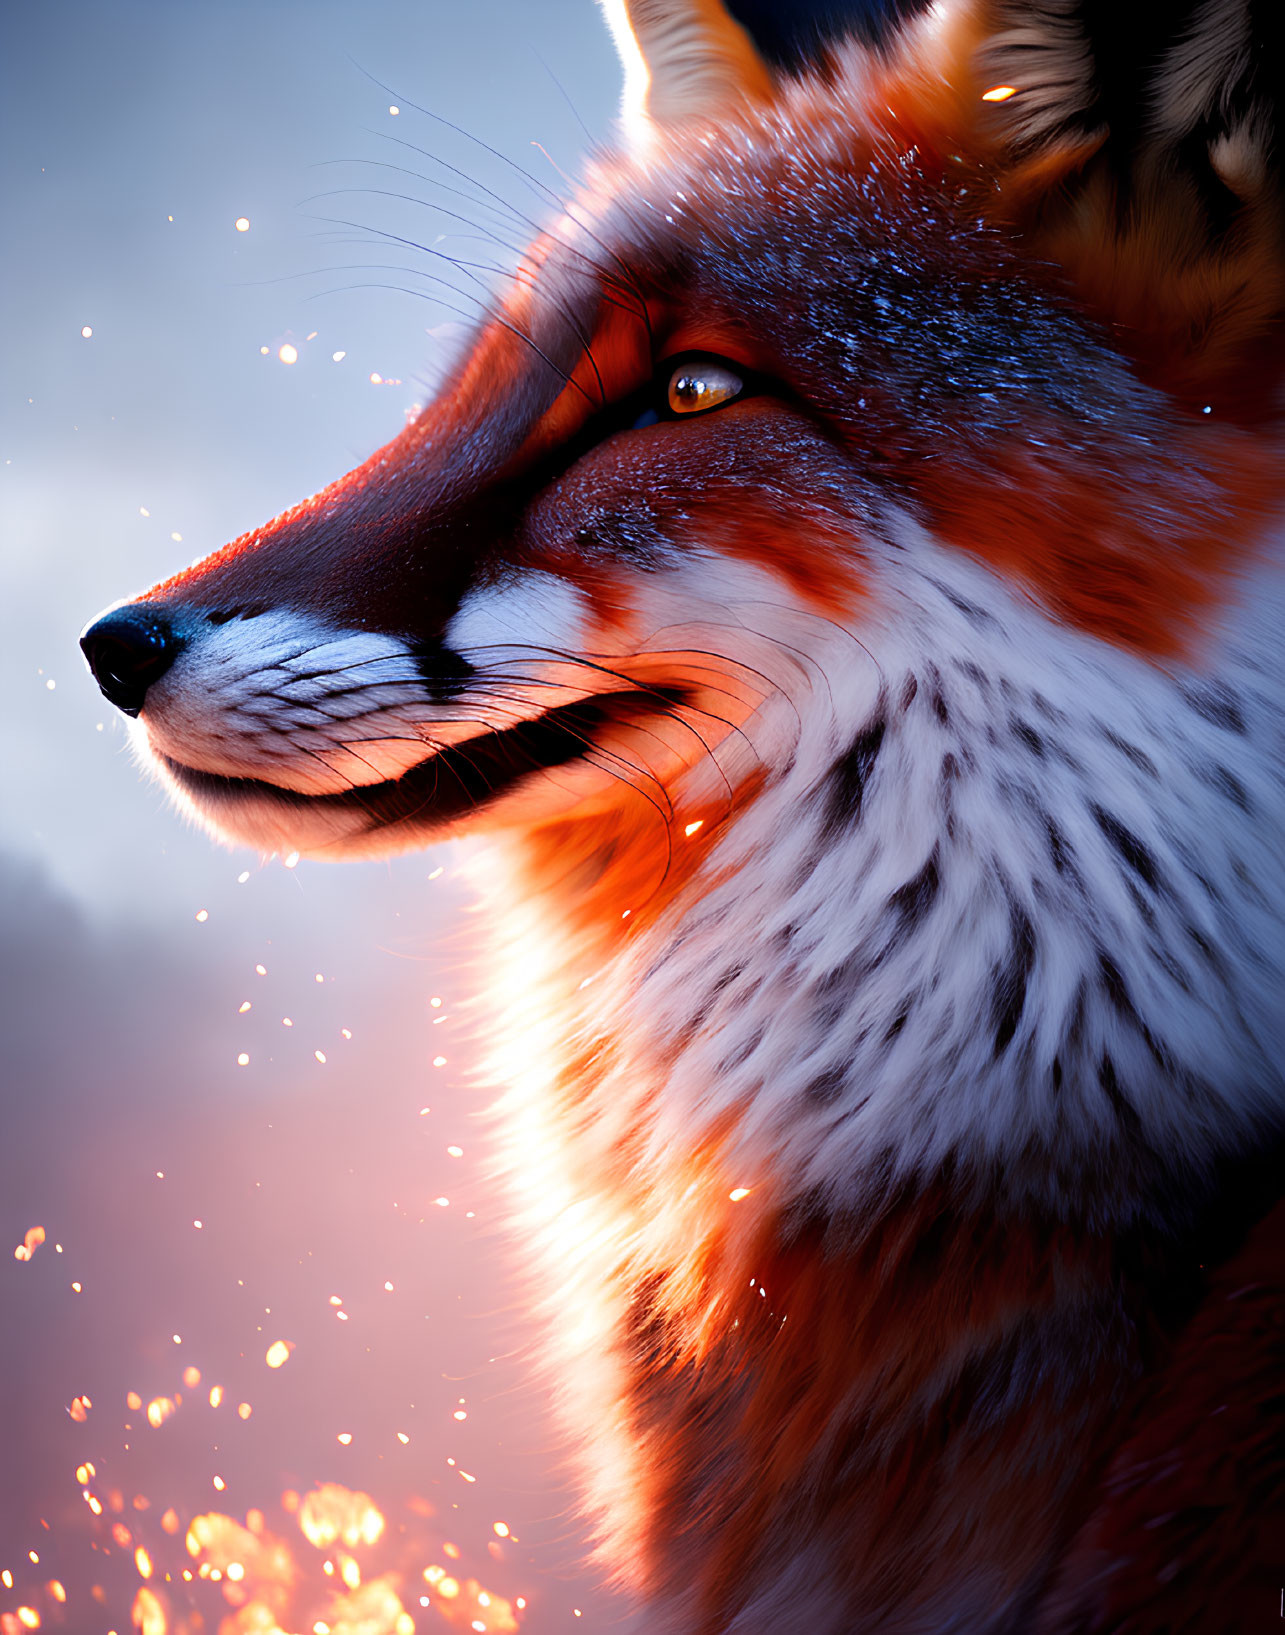 Vivid close-up of red fox with detailed textures and glowing ambiance